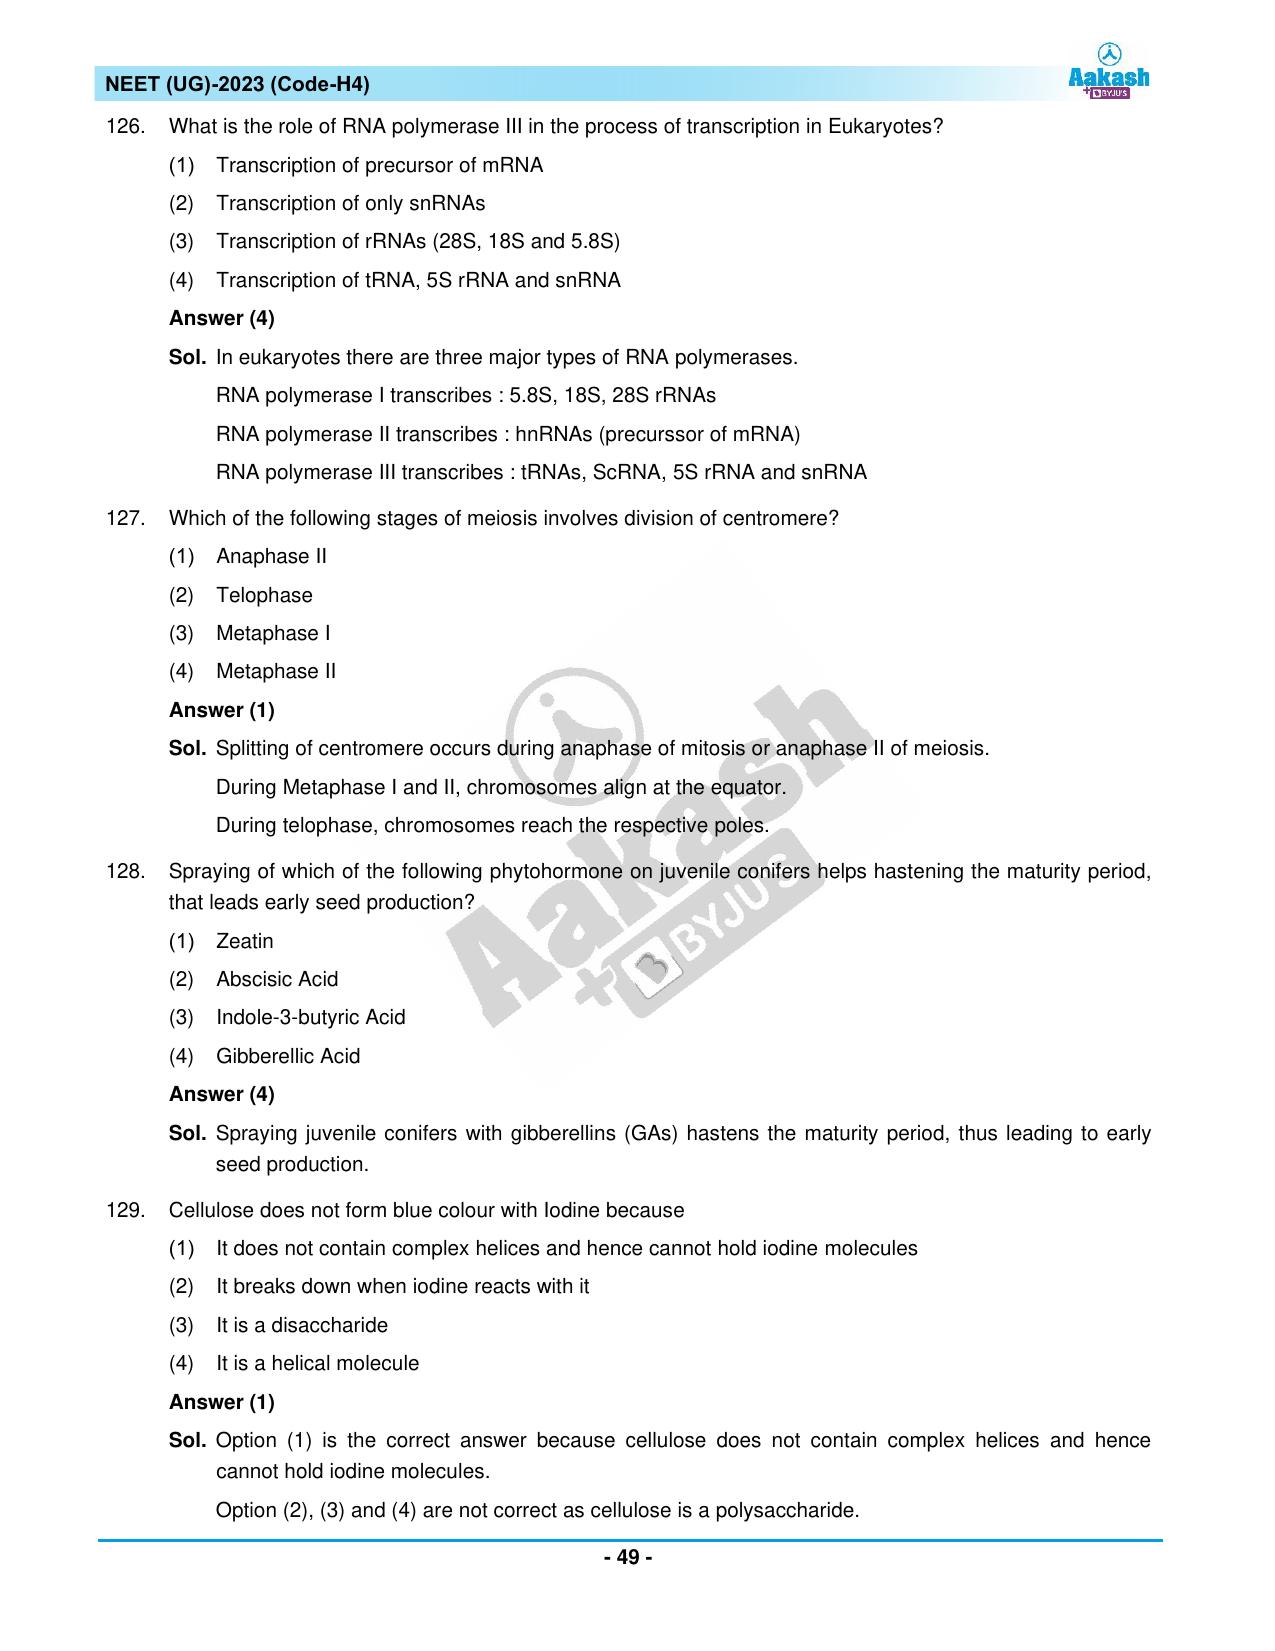 NEET 2023 Question Paper H4 - Page 49